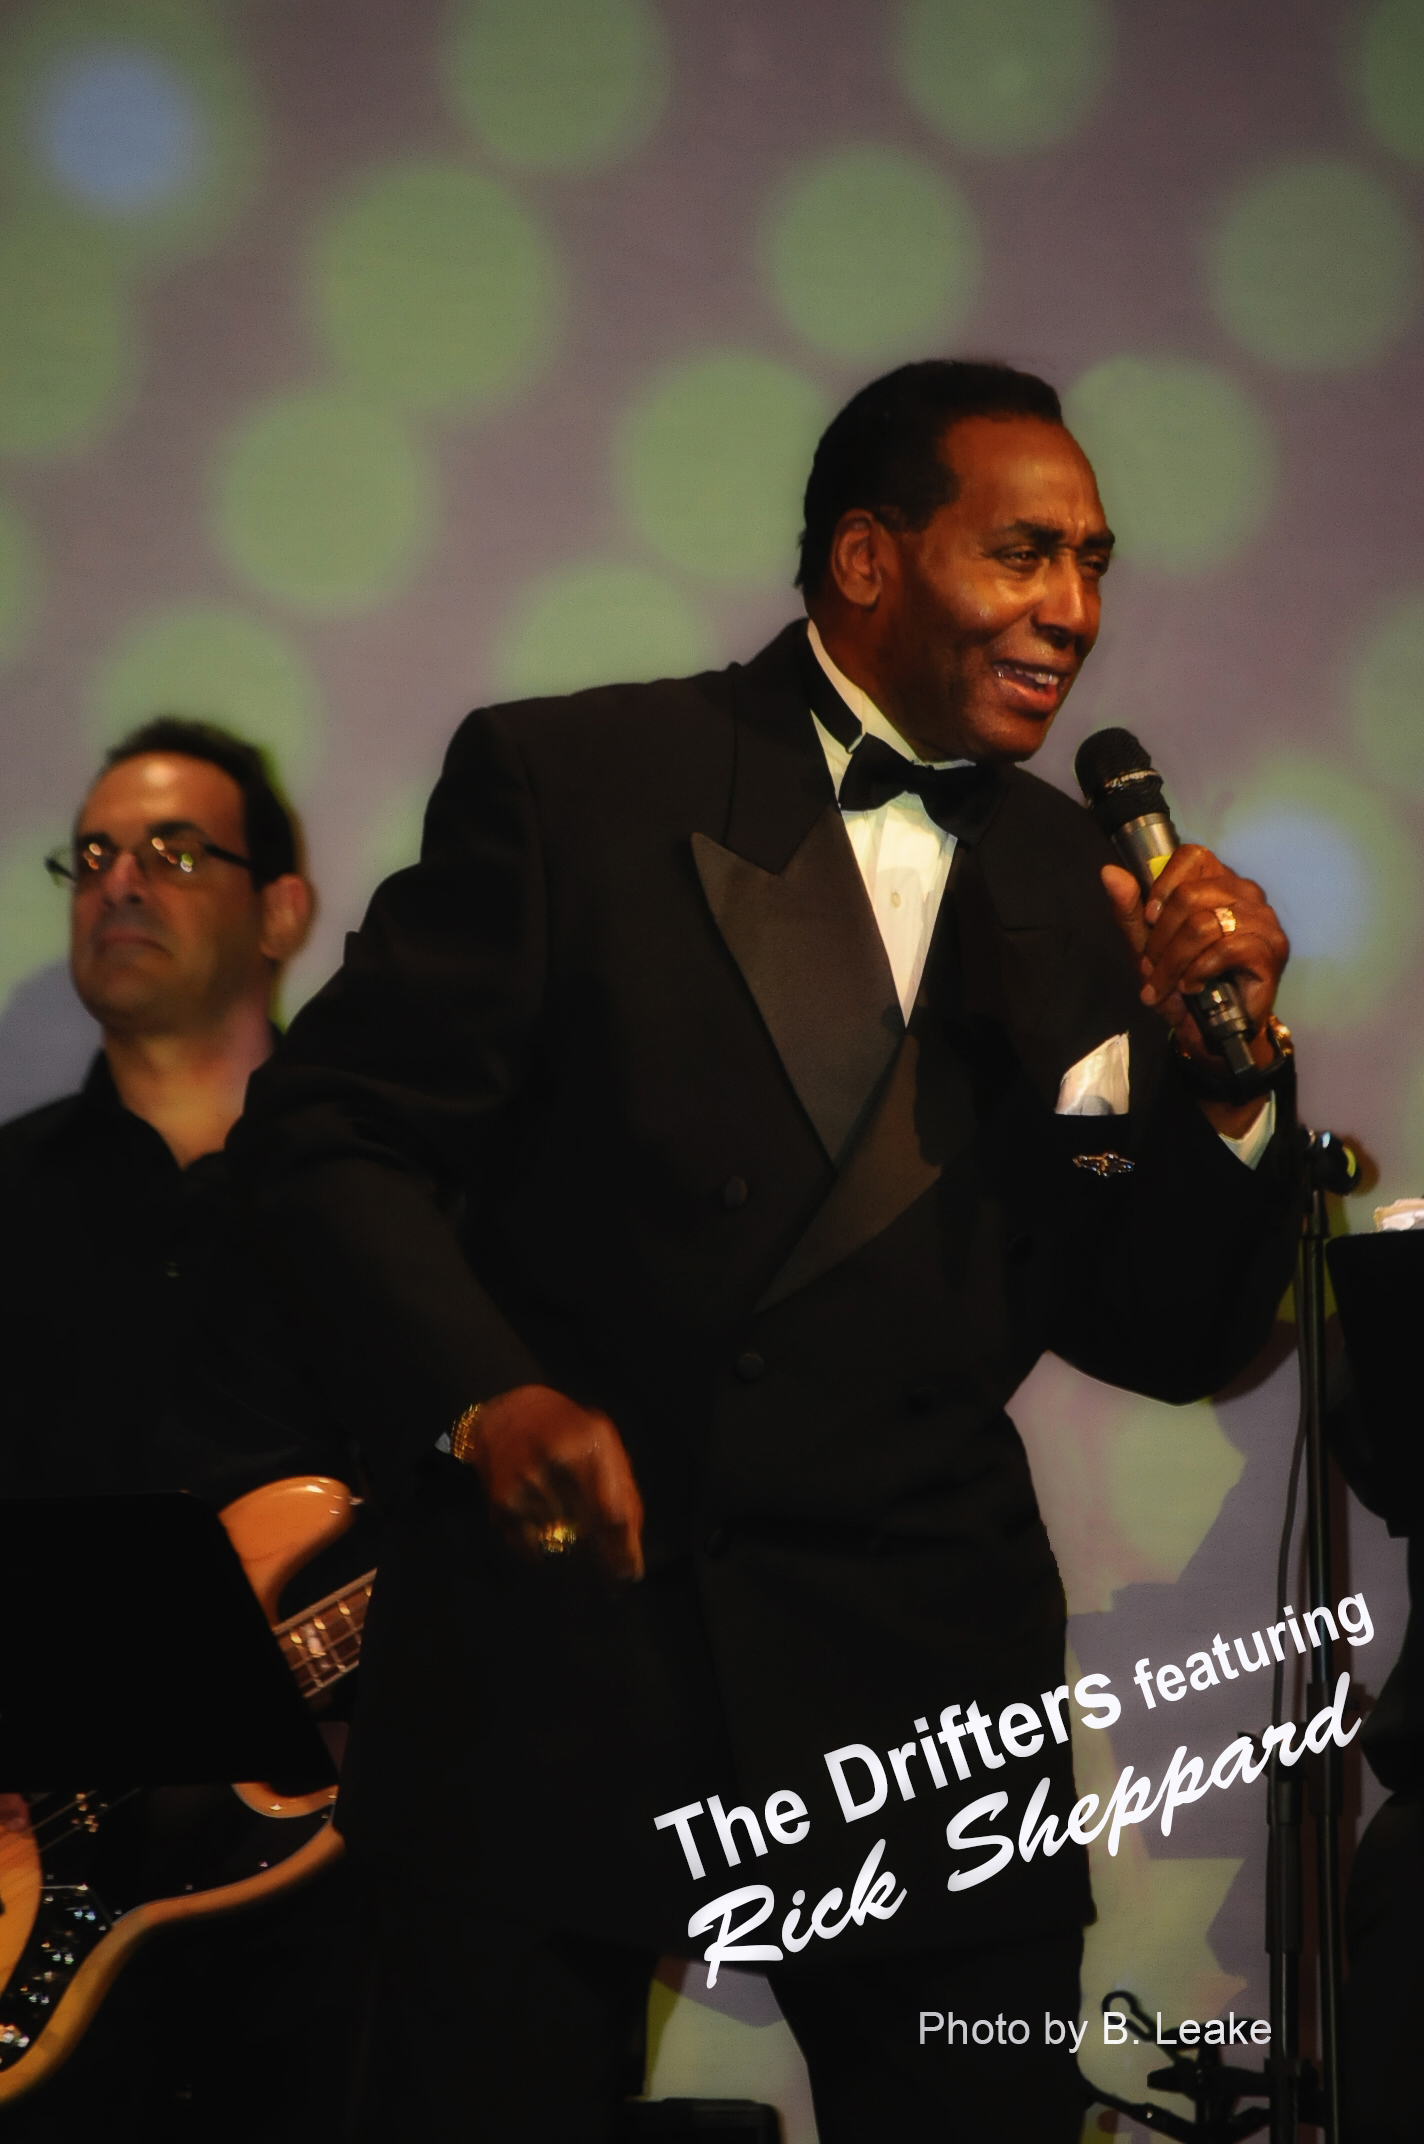 How Rick Sheppard Became a Singer for The Drifters